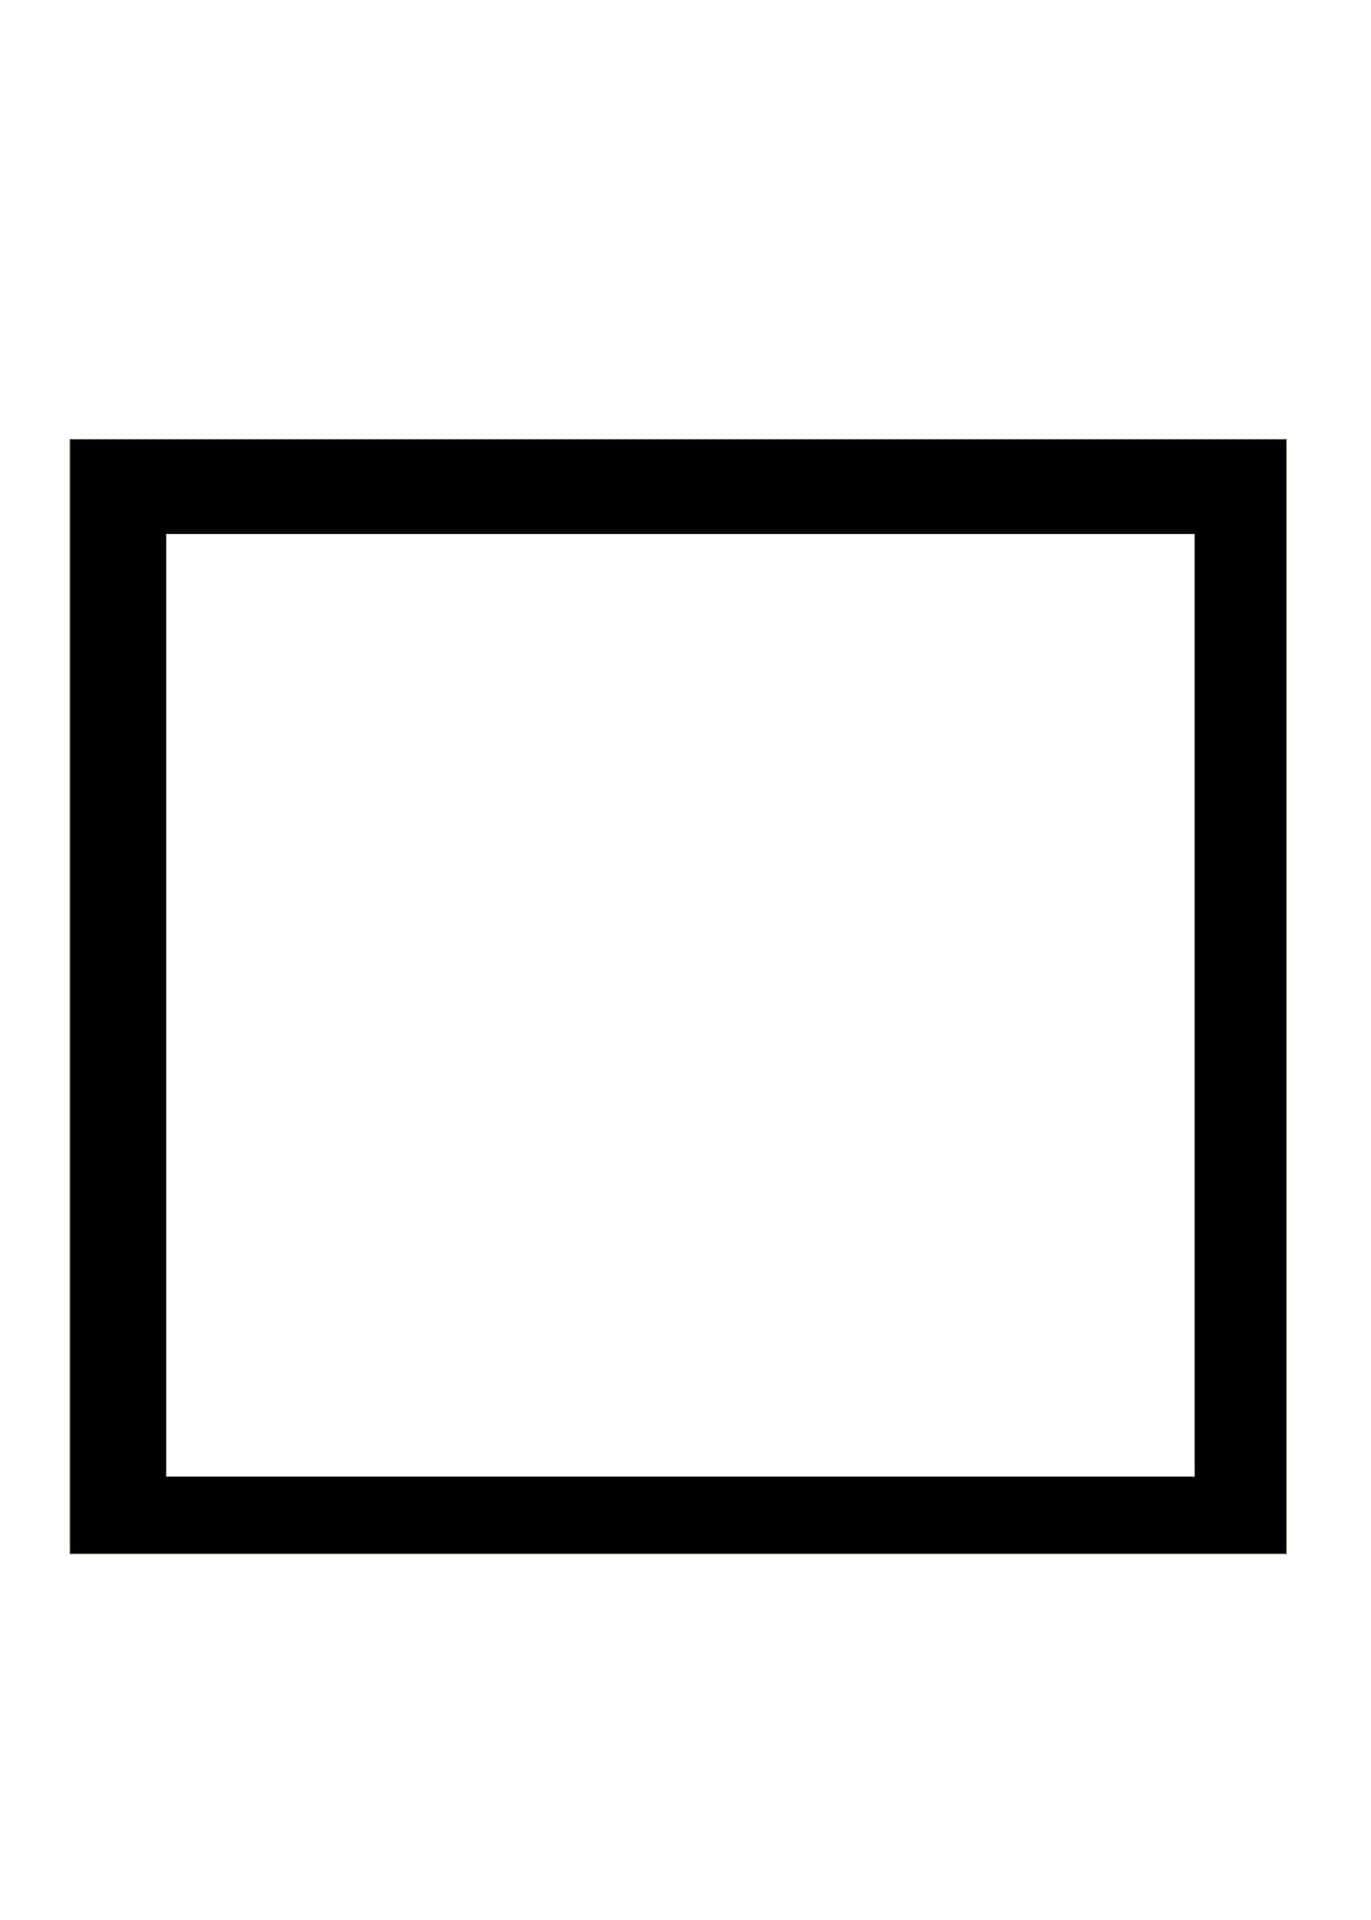 A Black And White Picture Of A Square Frame